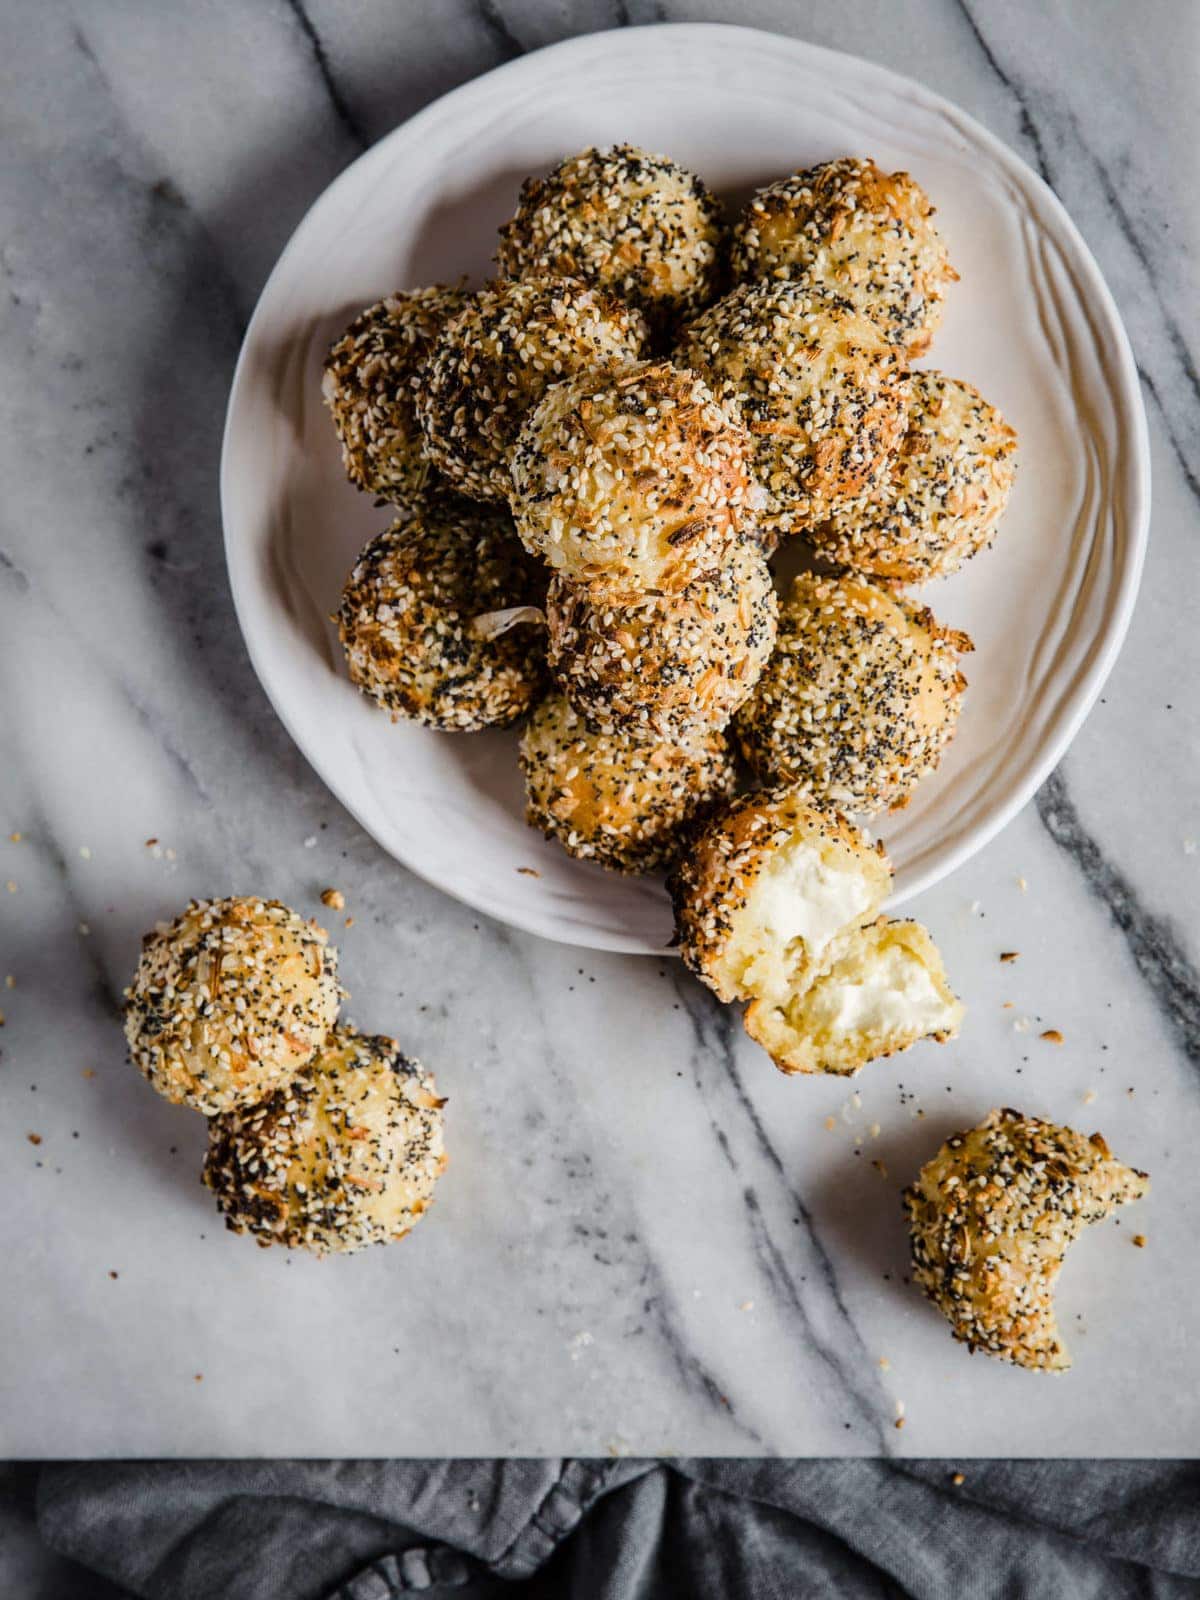 A white plate piled high with low carb cream cheese stuffed bagel bites - coated generously with everything bagel seasoning.